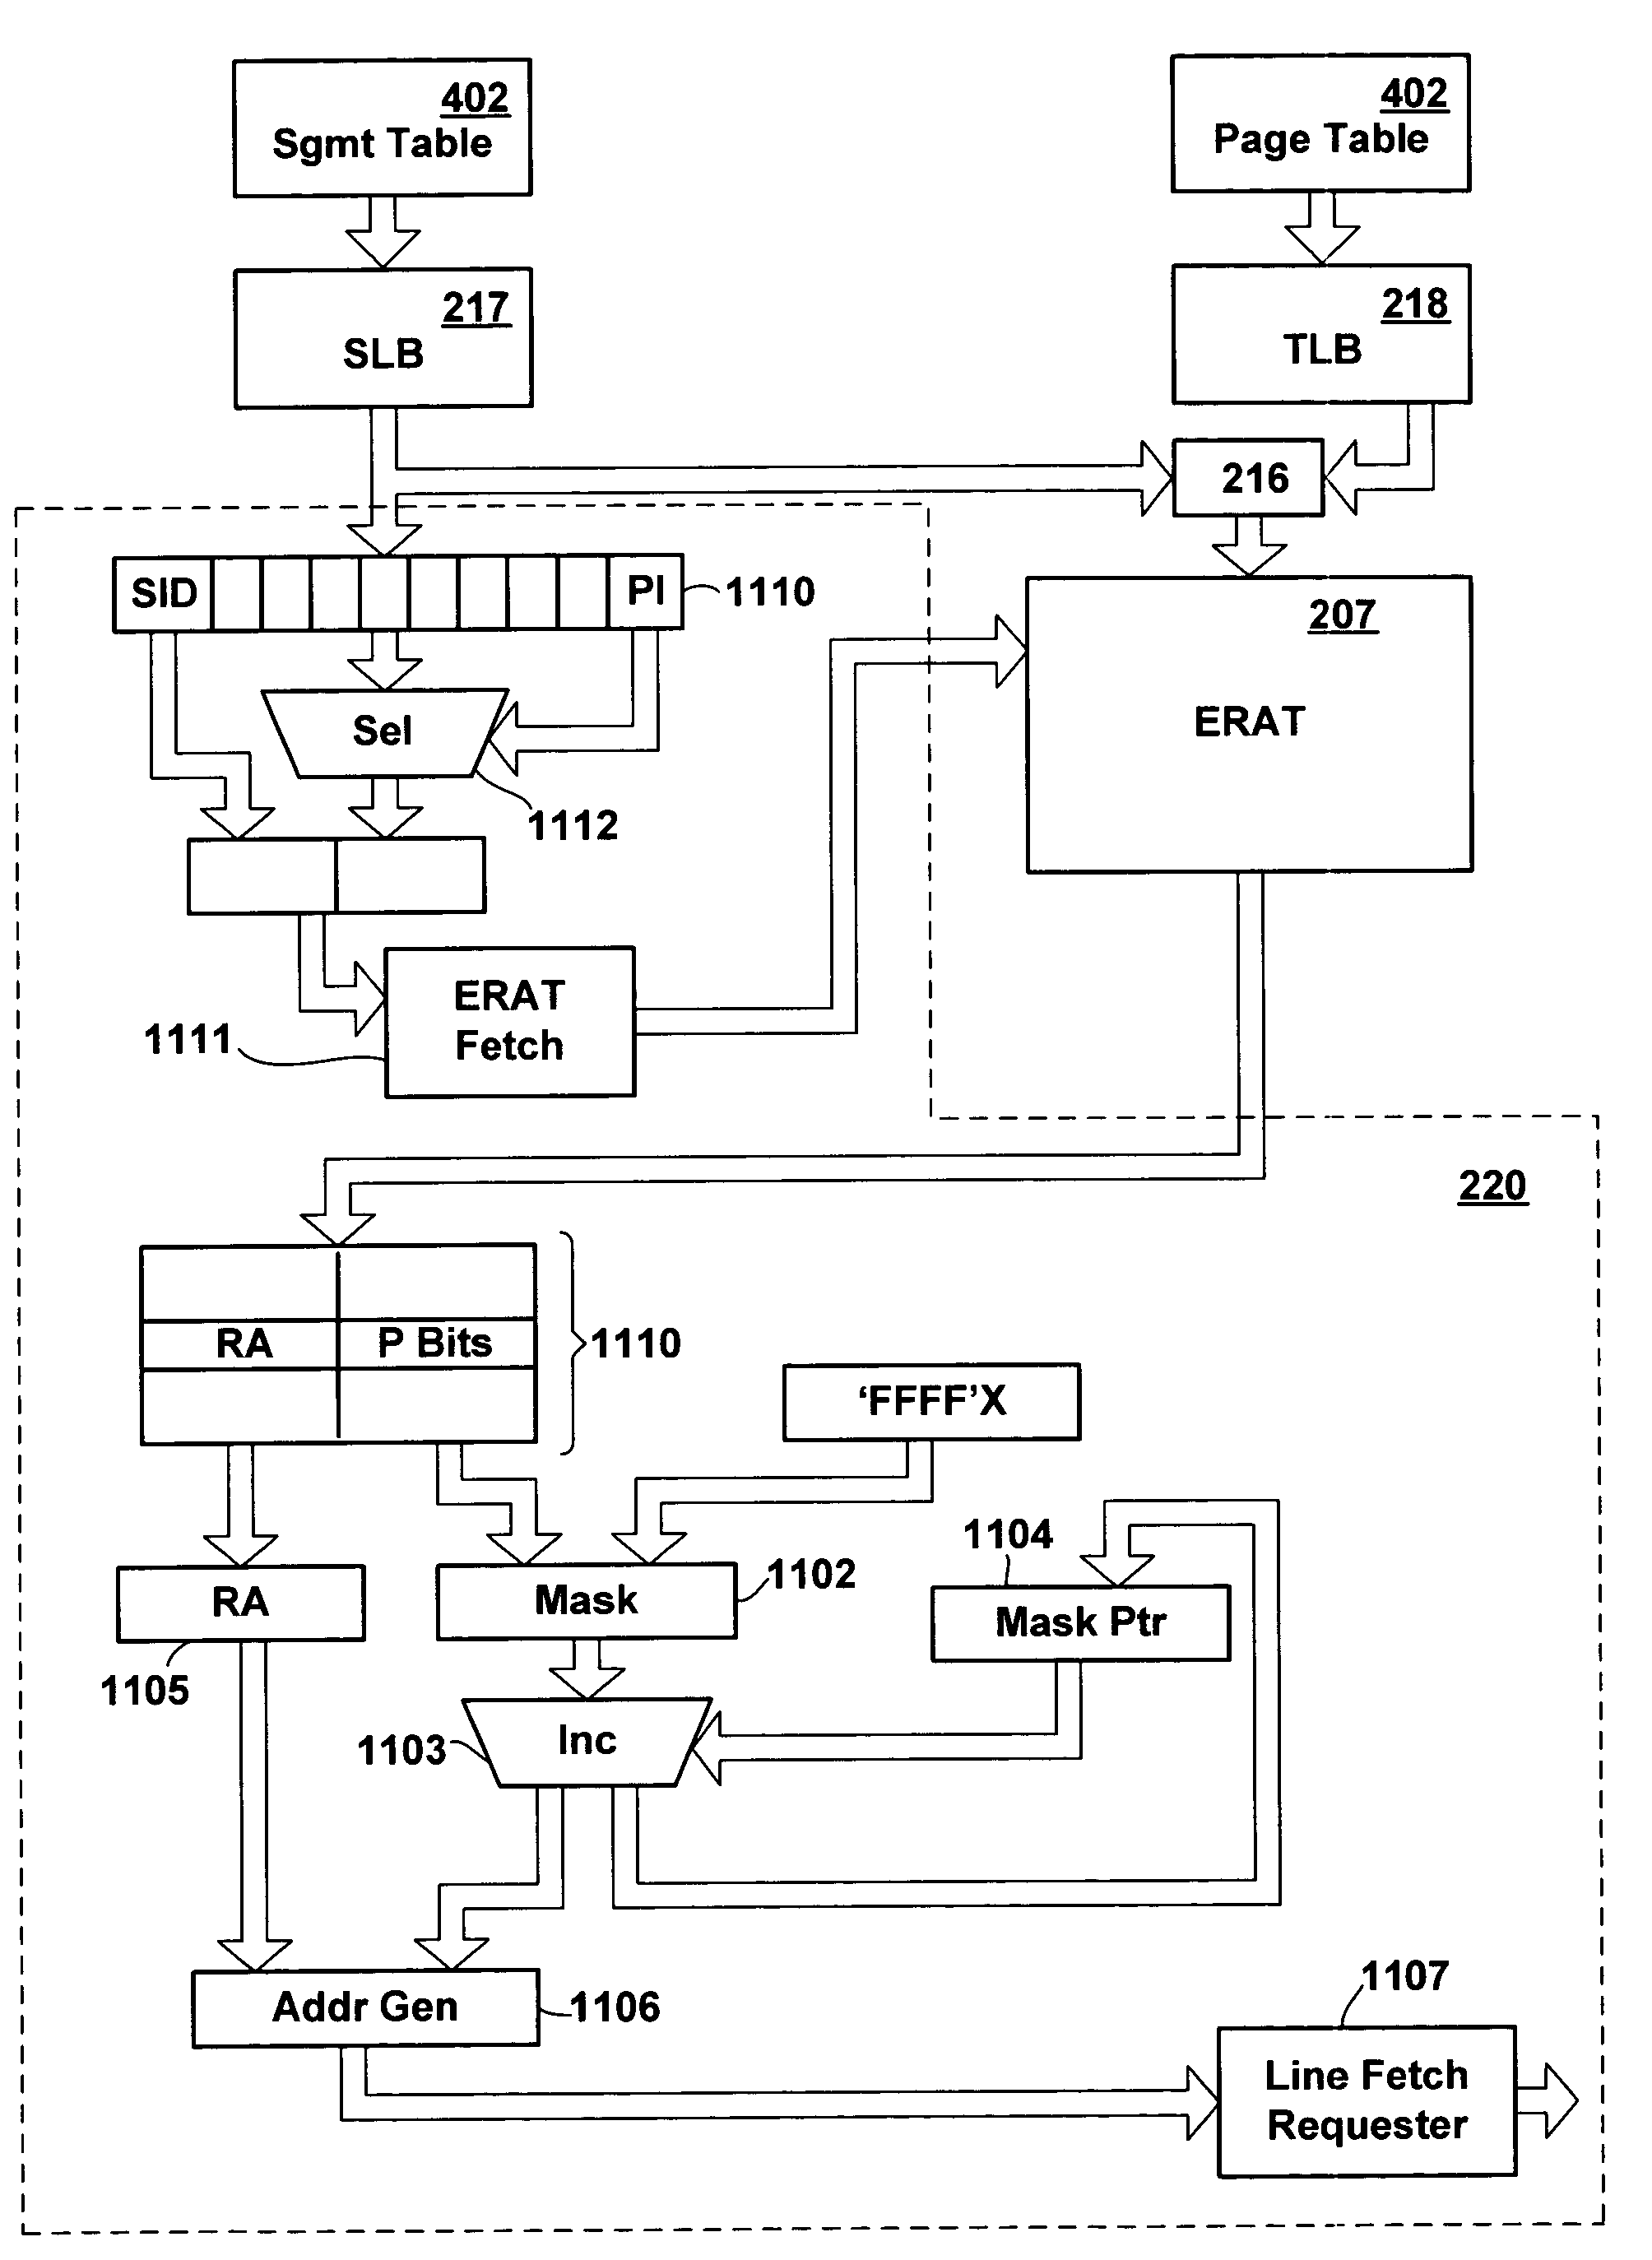 Apparatus and method for pre-fetching data to cached memory using persistent historical page table data